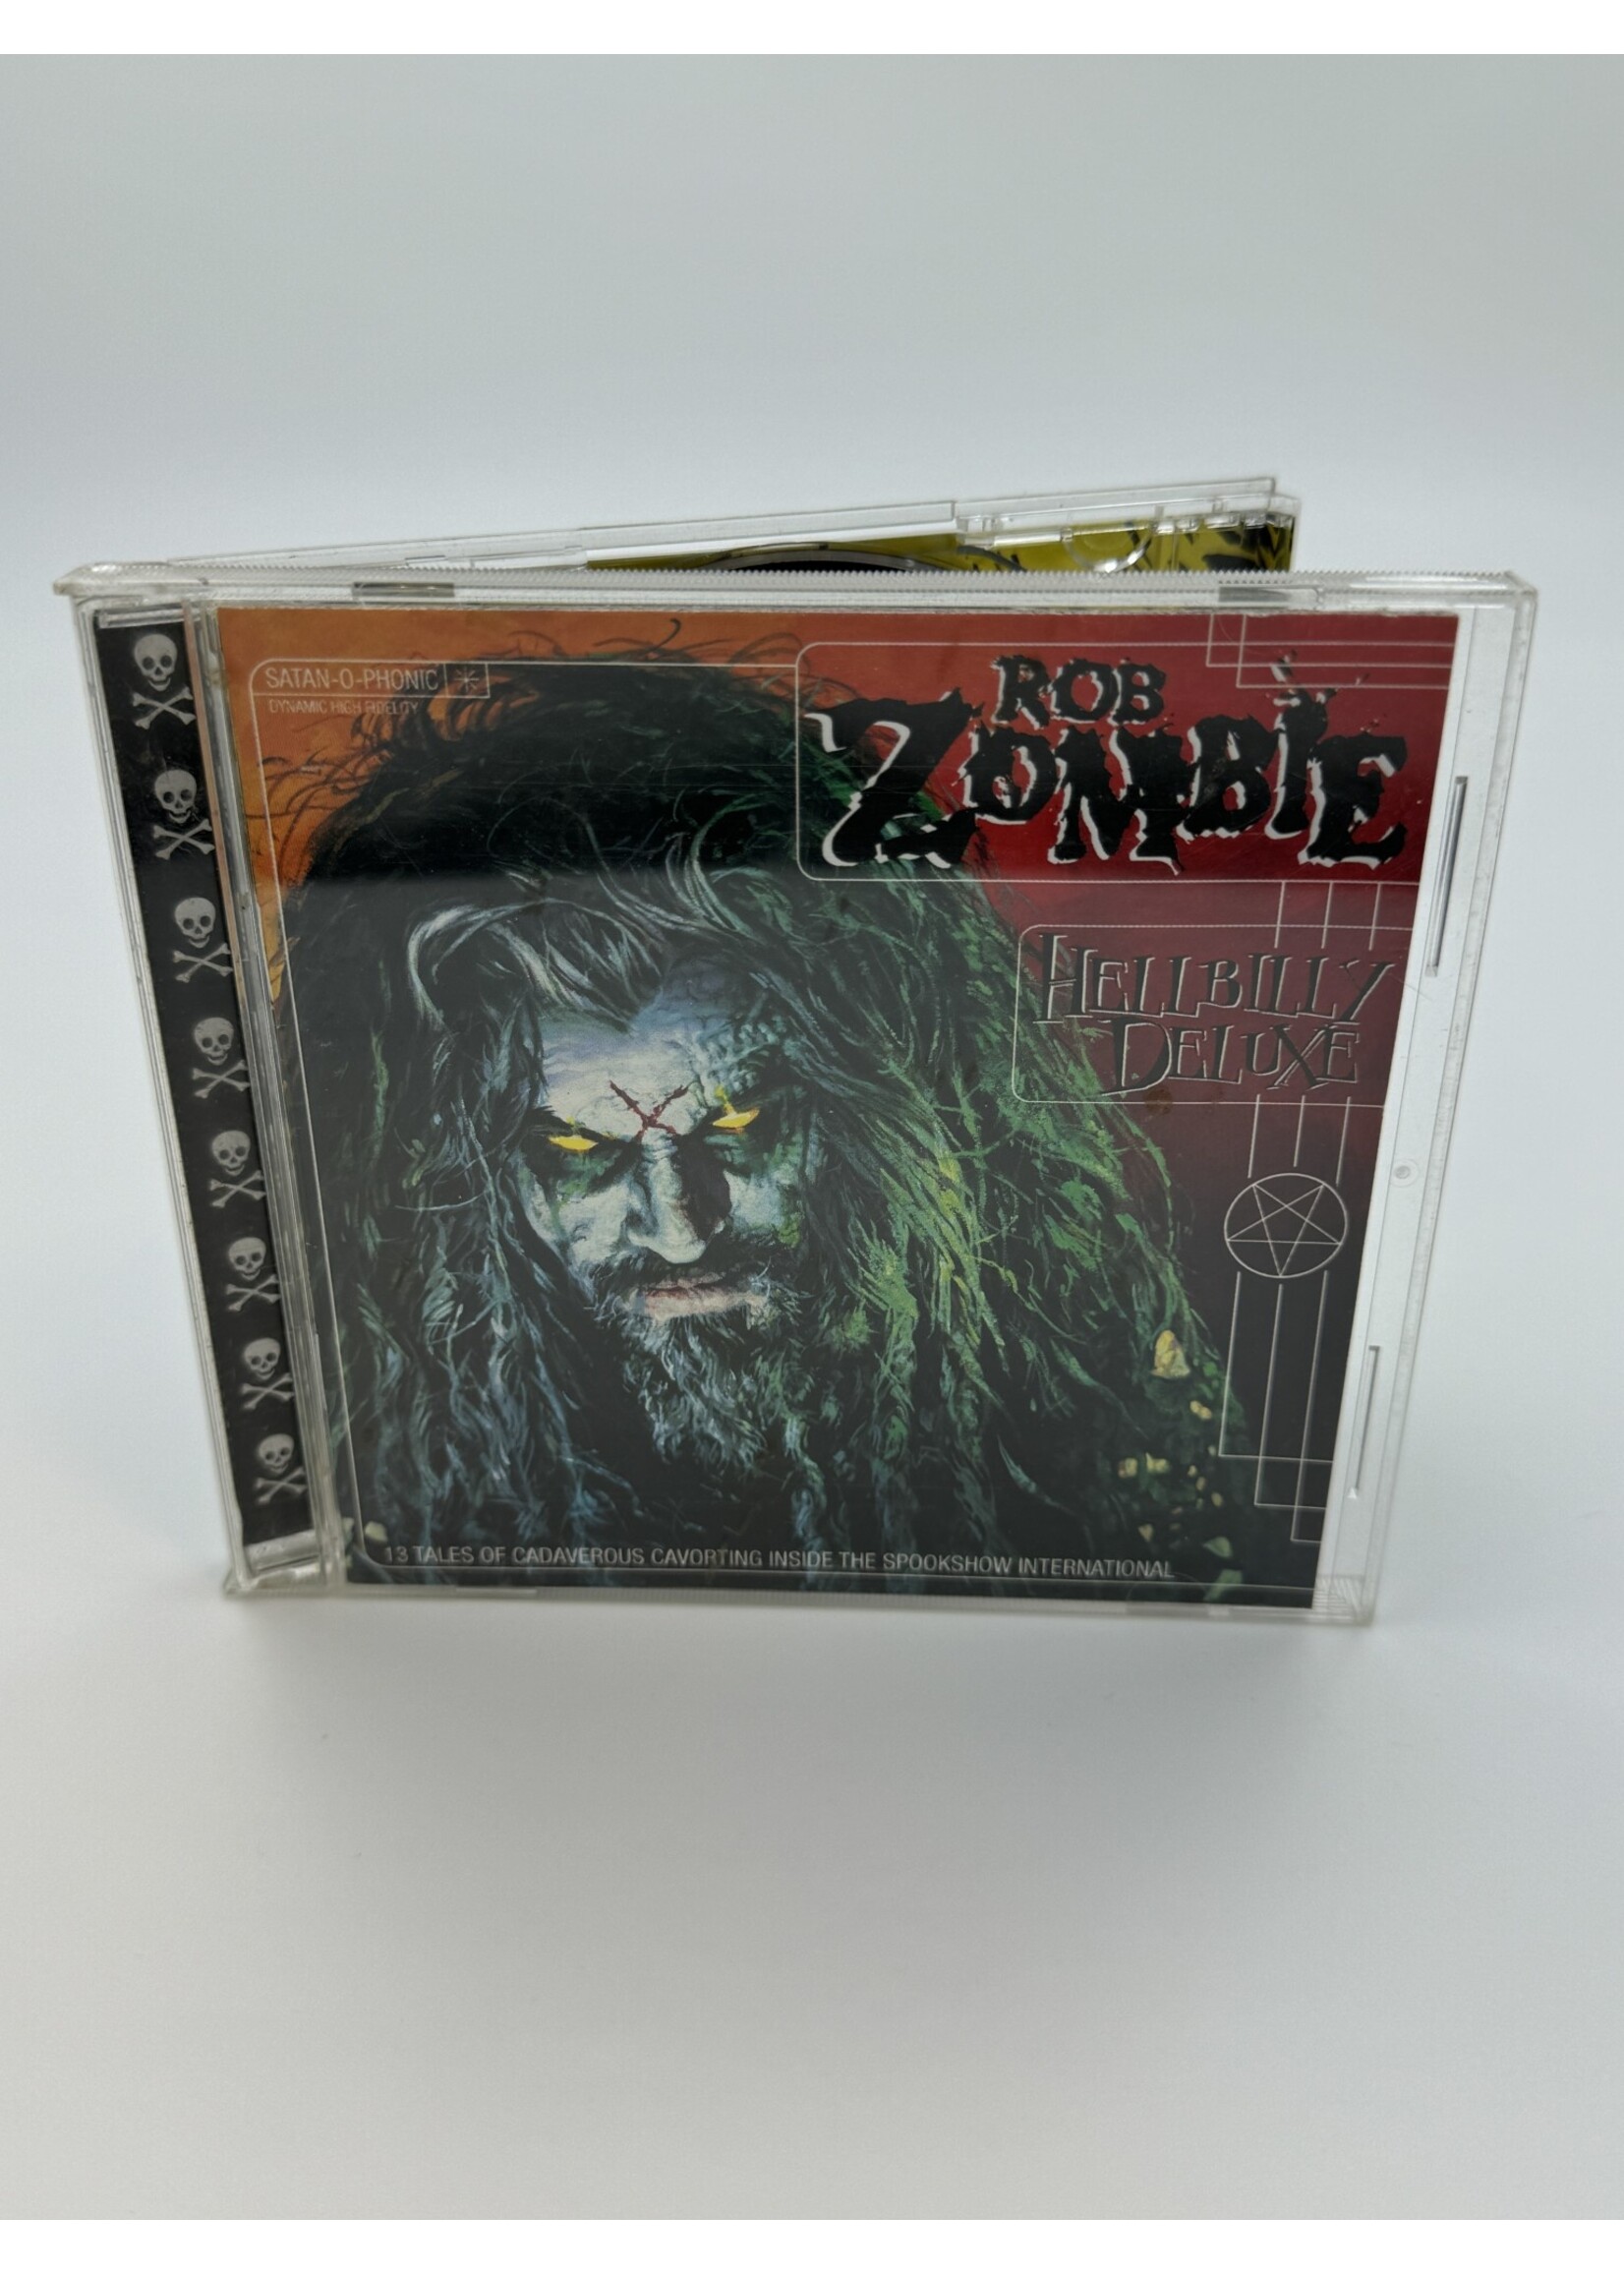 CD Rob Zombie Hellbilly Deluxe CD